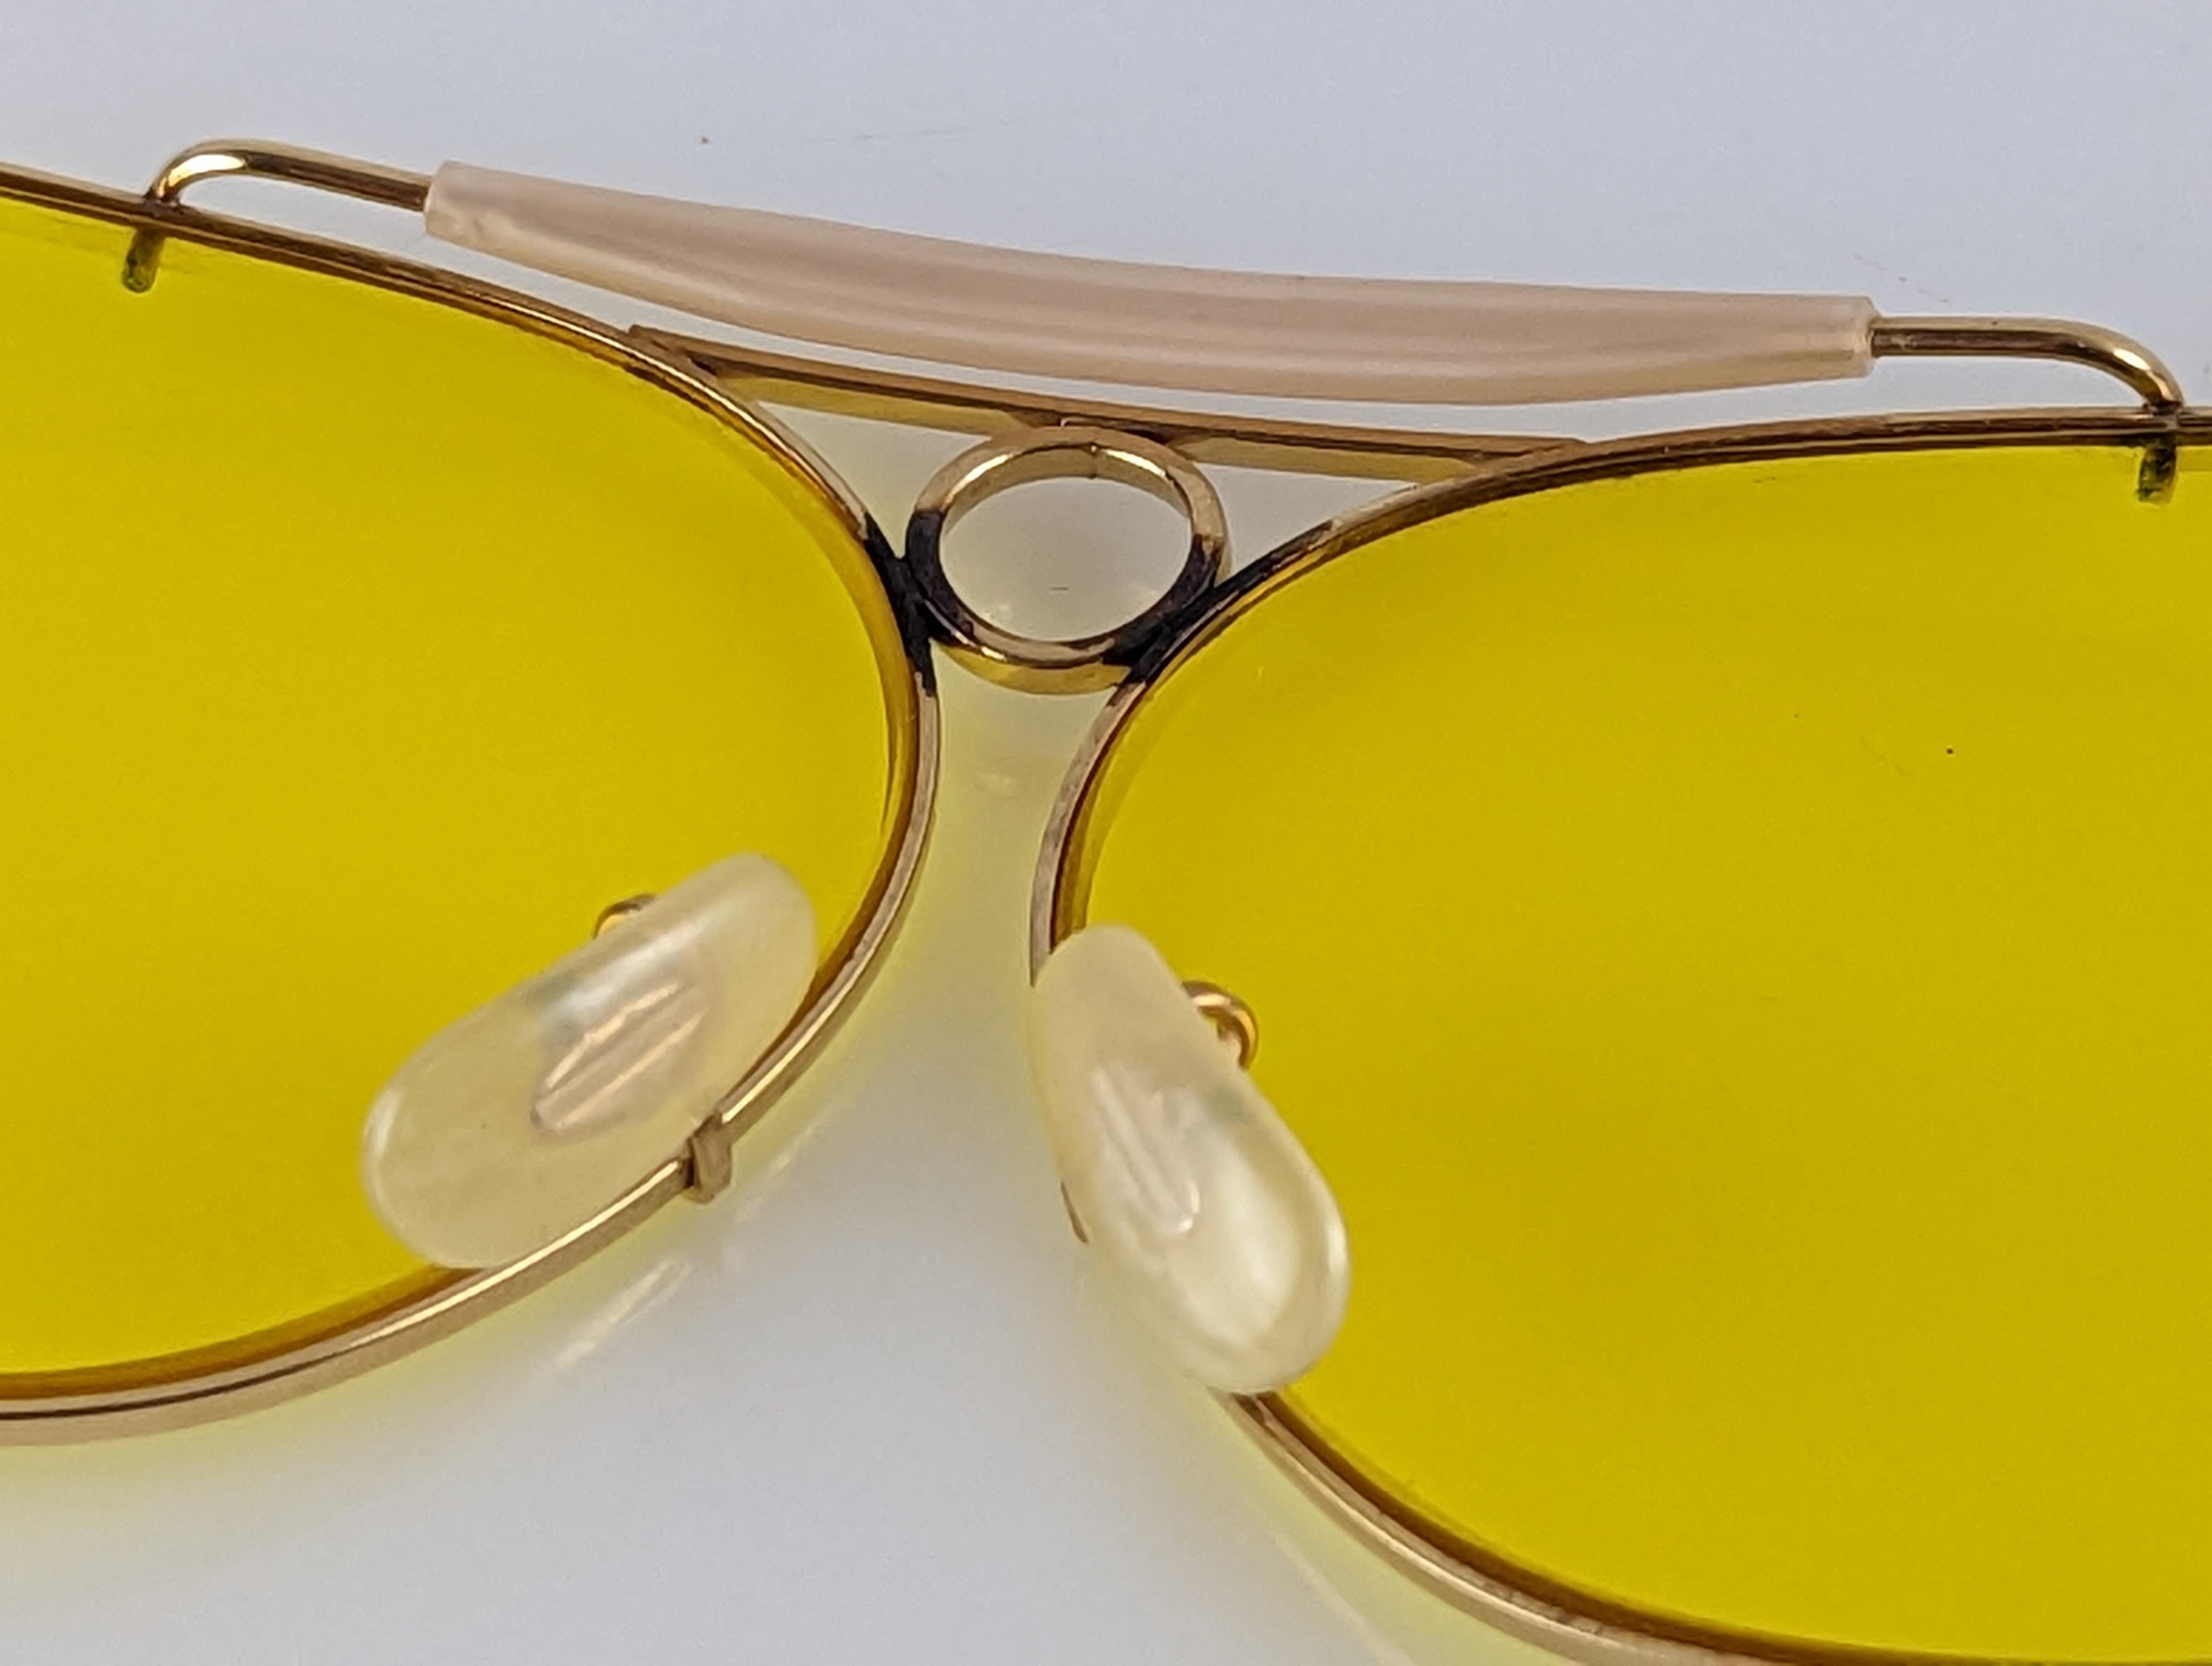 Exclusive Rayban Bausch & Lomb Ray-Ban Shooter 1/30 10K GO Gold 1970s Glasses For Sale 1